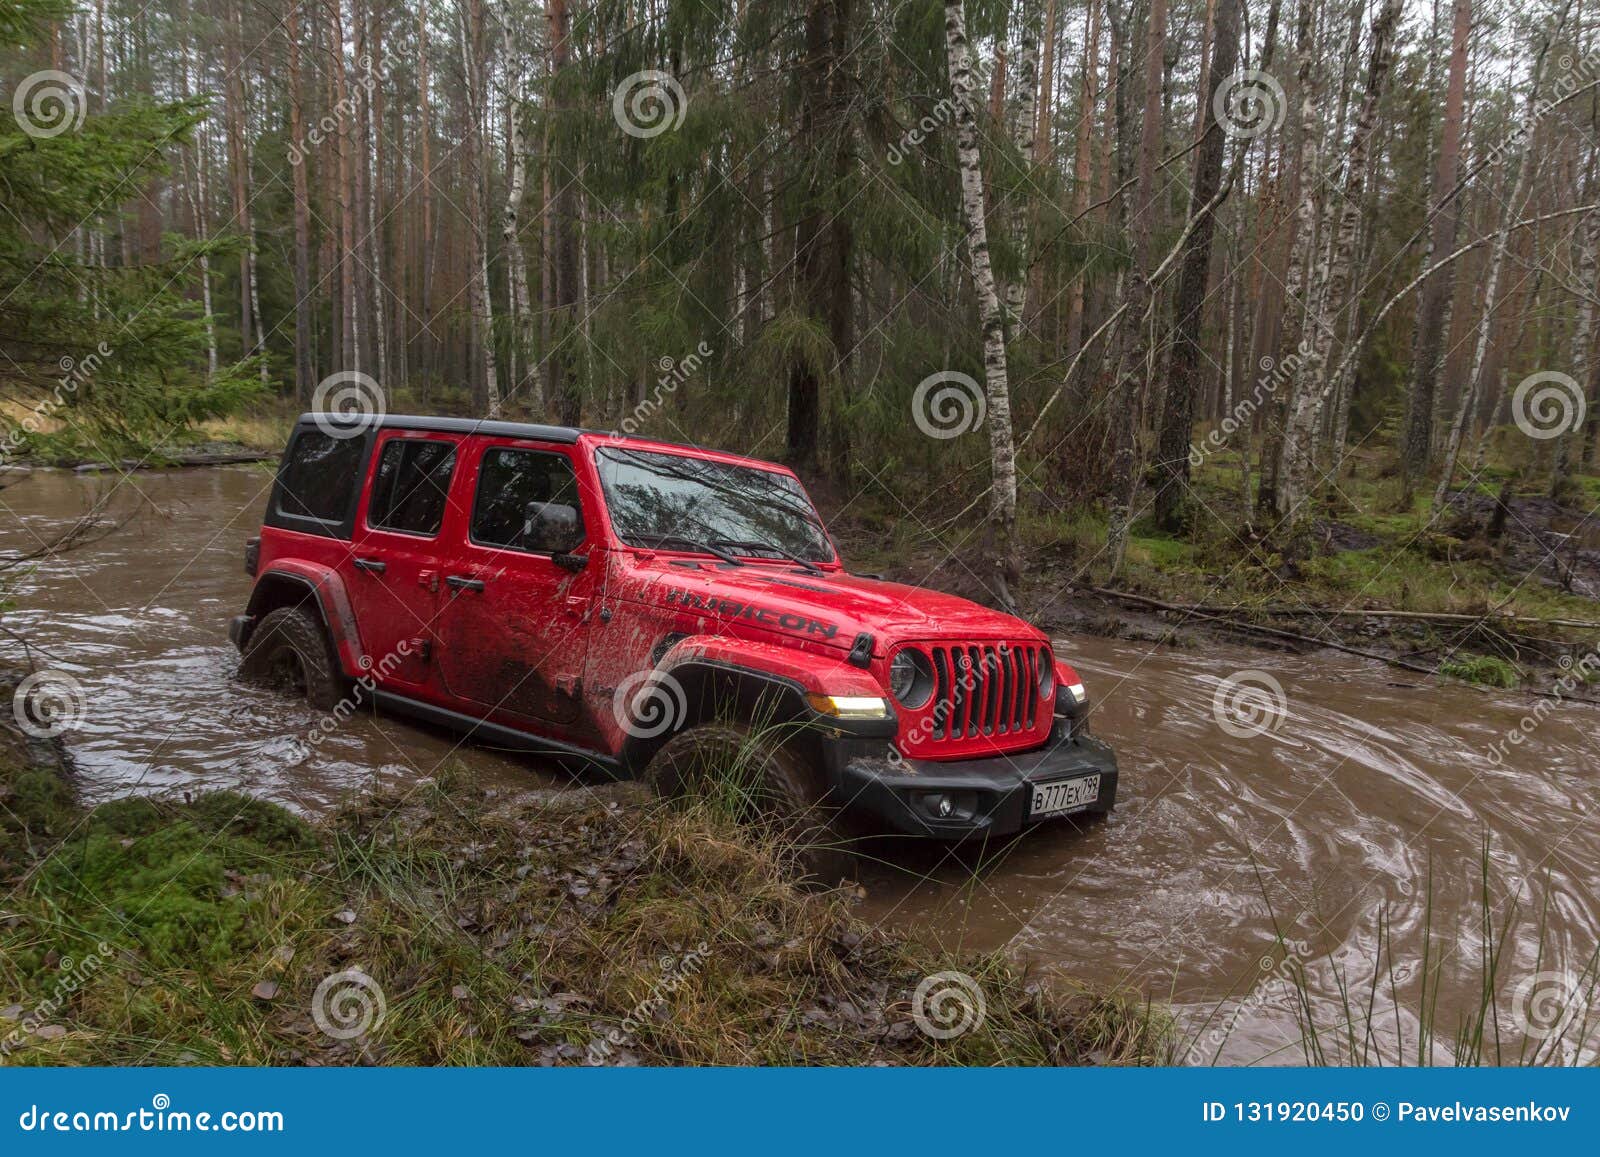 New Off-road Jeep Wrangler Rubicon Jl in the Leningrad Region Editorial  Image - Image of sports, wheels: 131920450